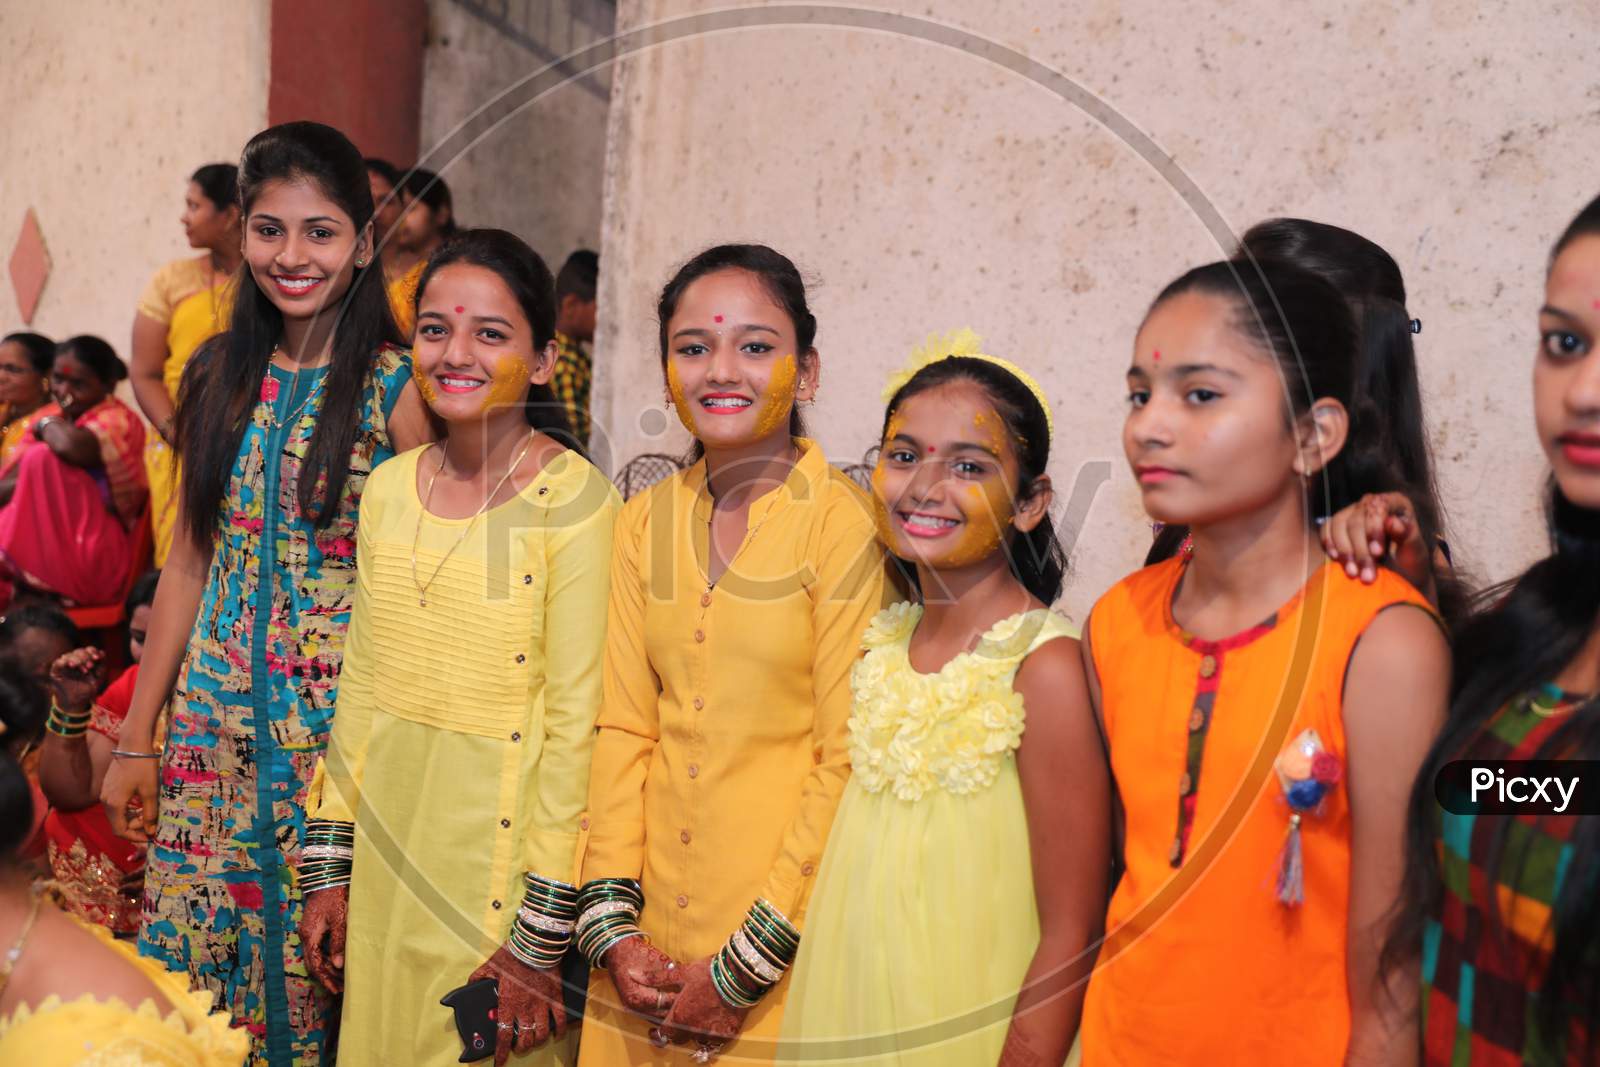 Indian Young Girls are smiling